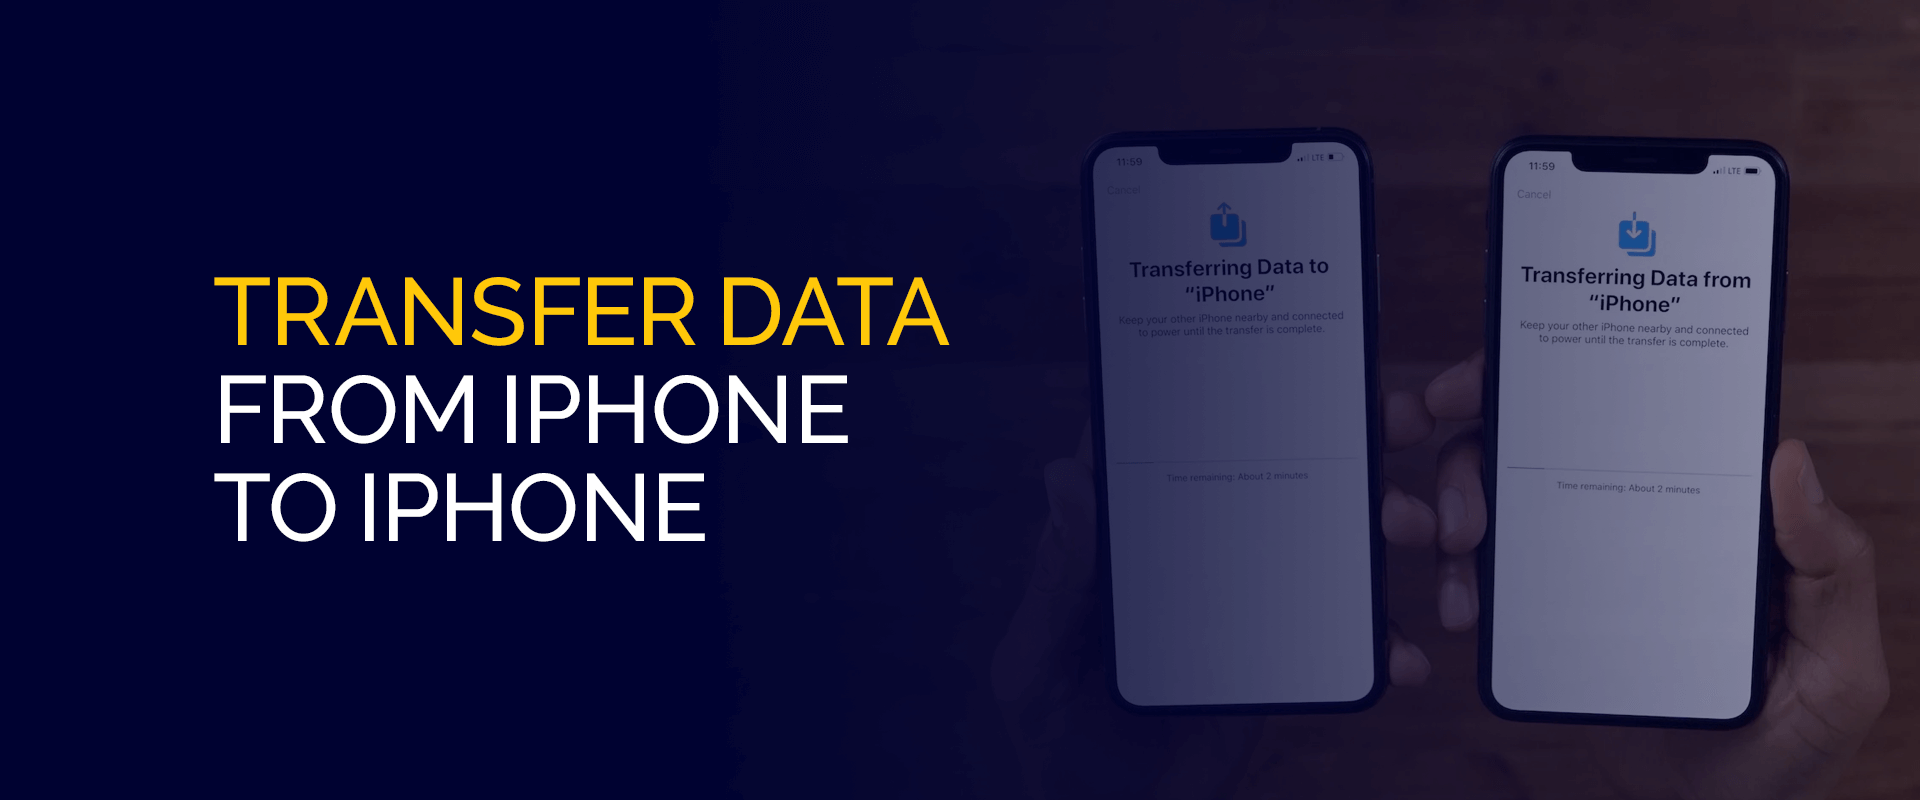 Transfer data from iphone to iphone